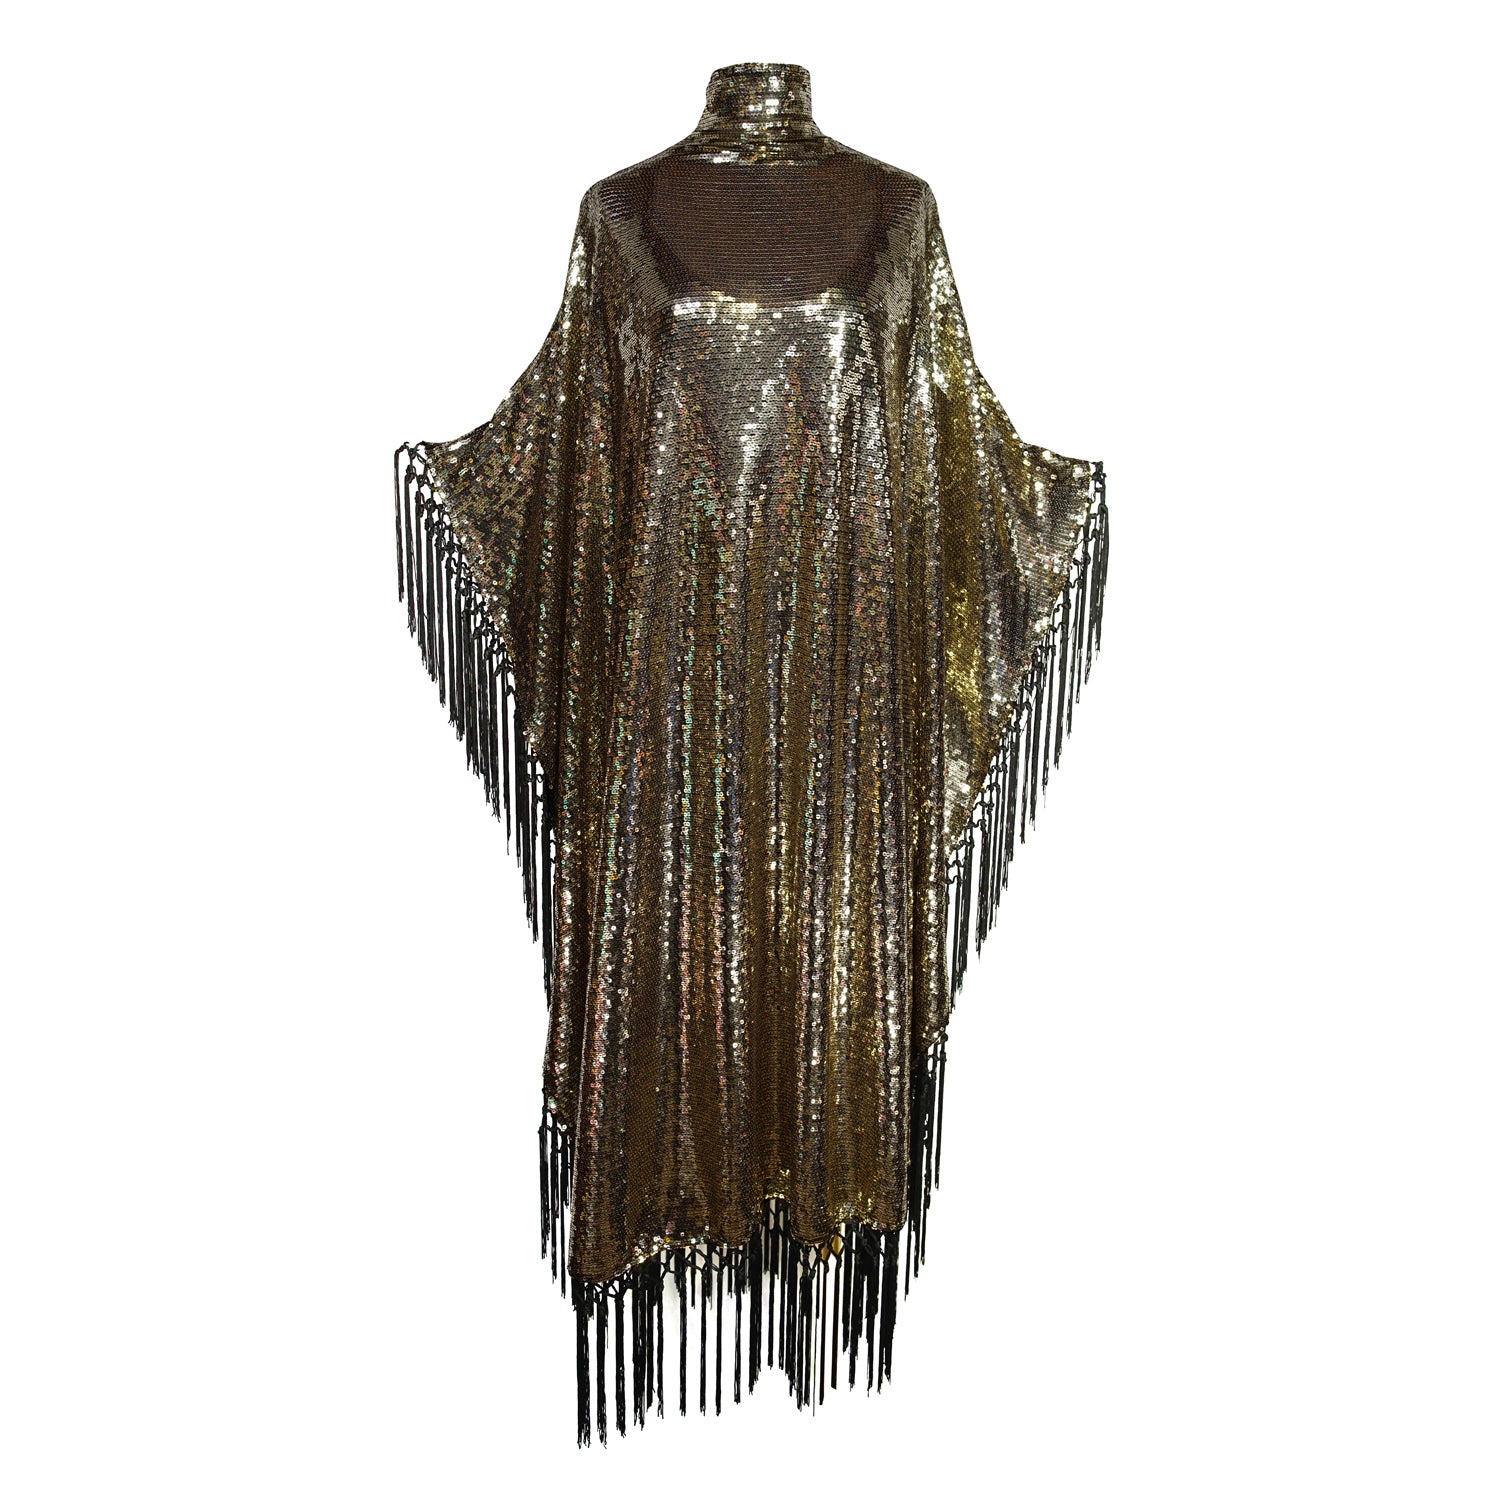 This caftan is a dazzling, full-length garment featuring a shimmering gold sequin overlay on a mesh fabric. The sequins catch the light, creating a sparkling effect throughout. It has a mock neck collar with a straight, loose fit that drapes elegantly over the body. The edges of the caftan, including the hem and the sides, are embellished with long, silk black fringe that add movement and a playful flair to the garment.